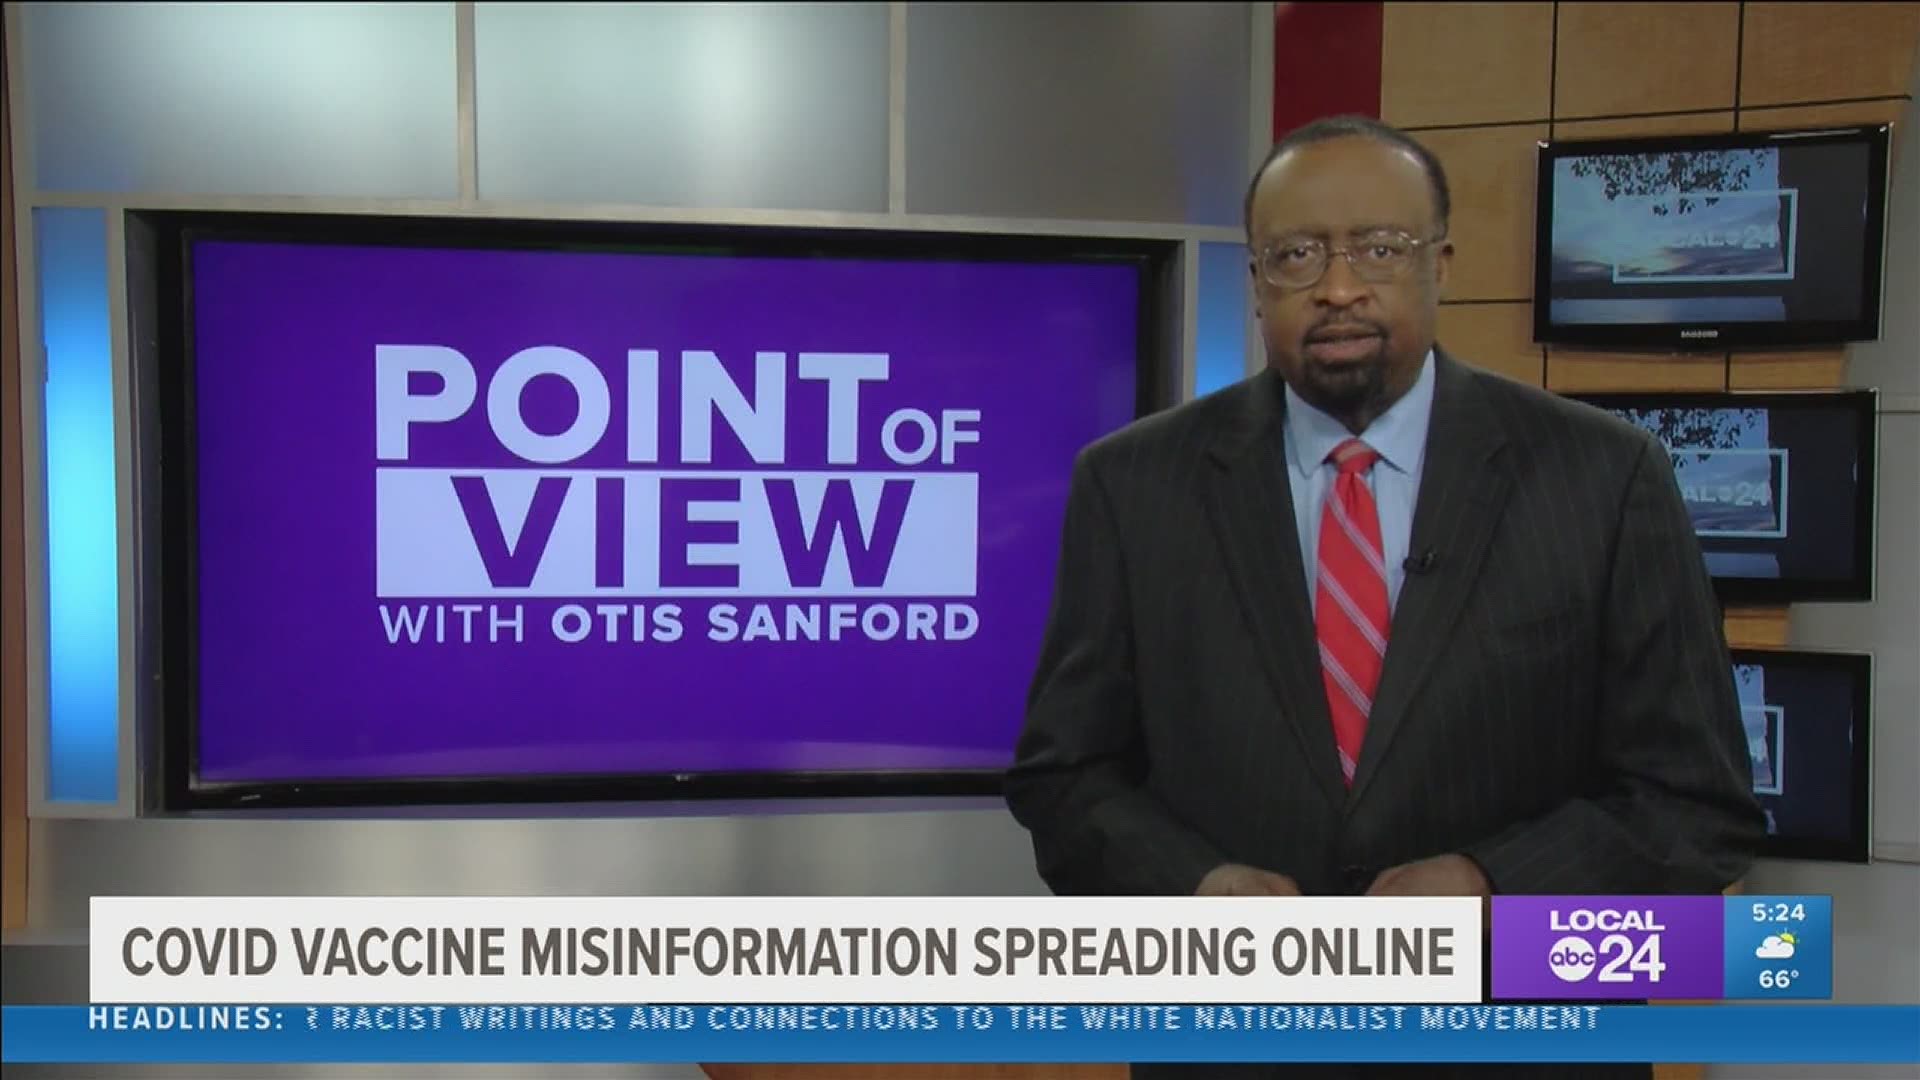 Local 24 News political analyst and commentator Otis Sanford shares his point of view on getting vaccinated for COVID-19 in Shelby County.